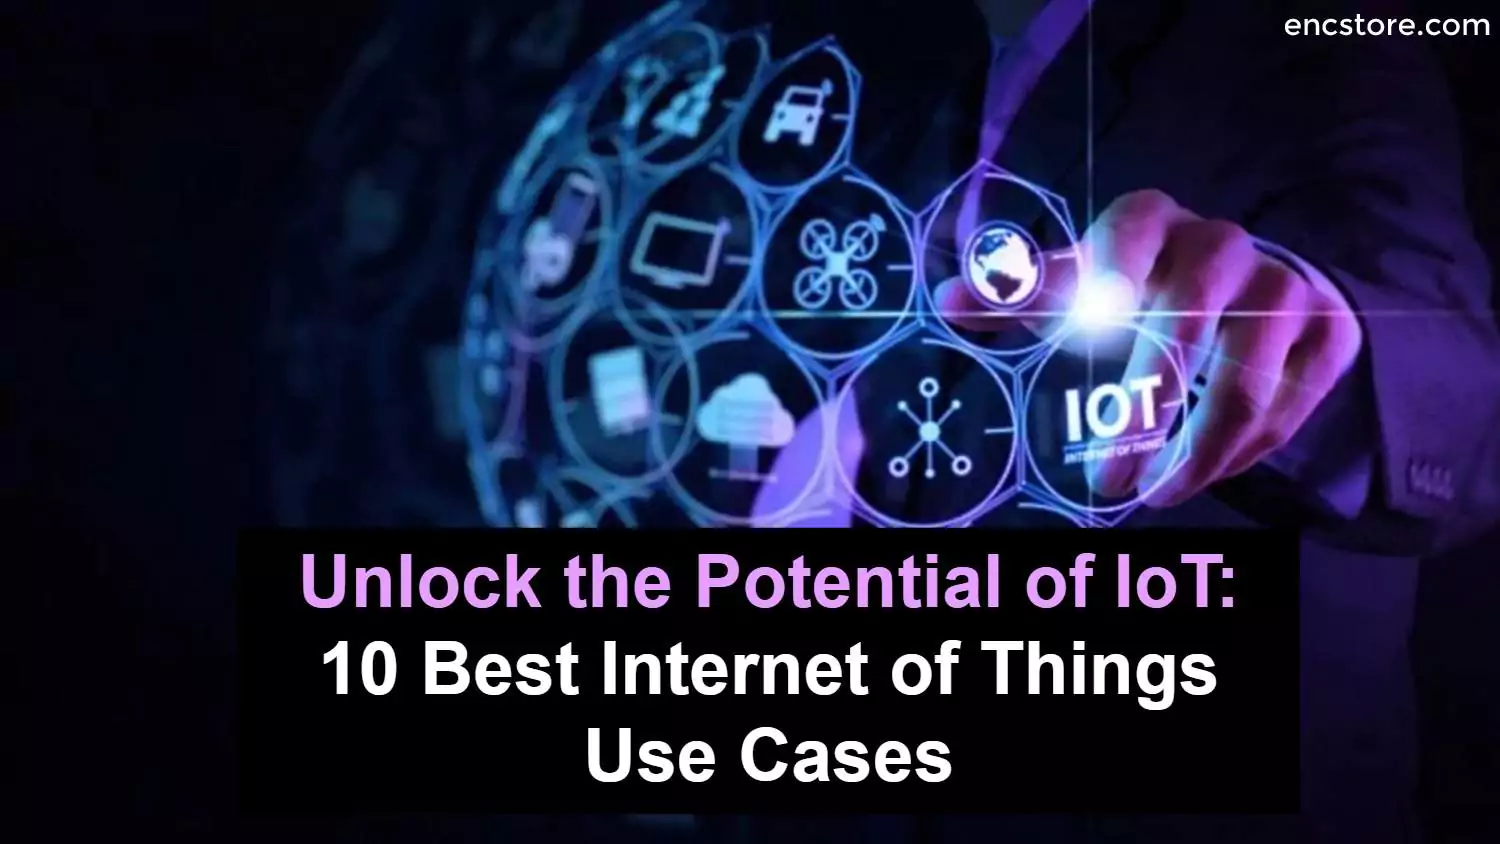 Unlock the potential of IoT